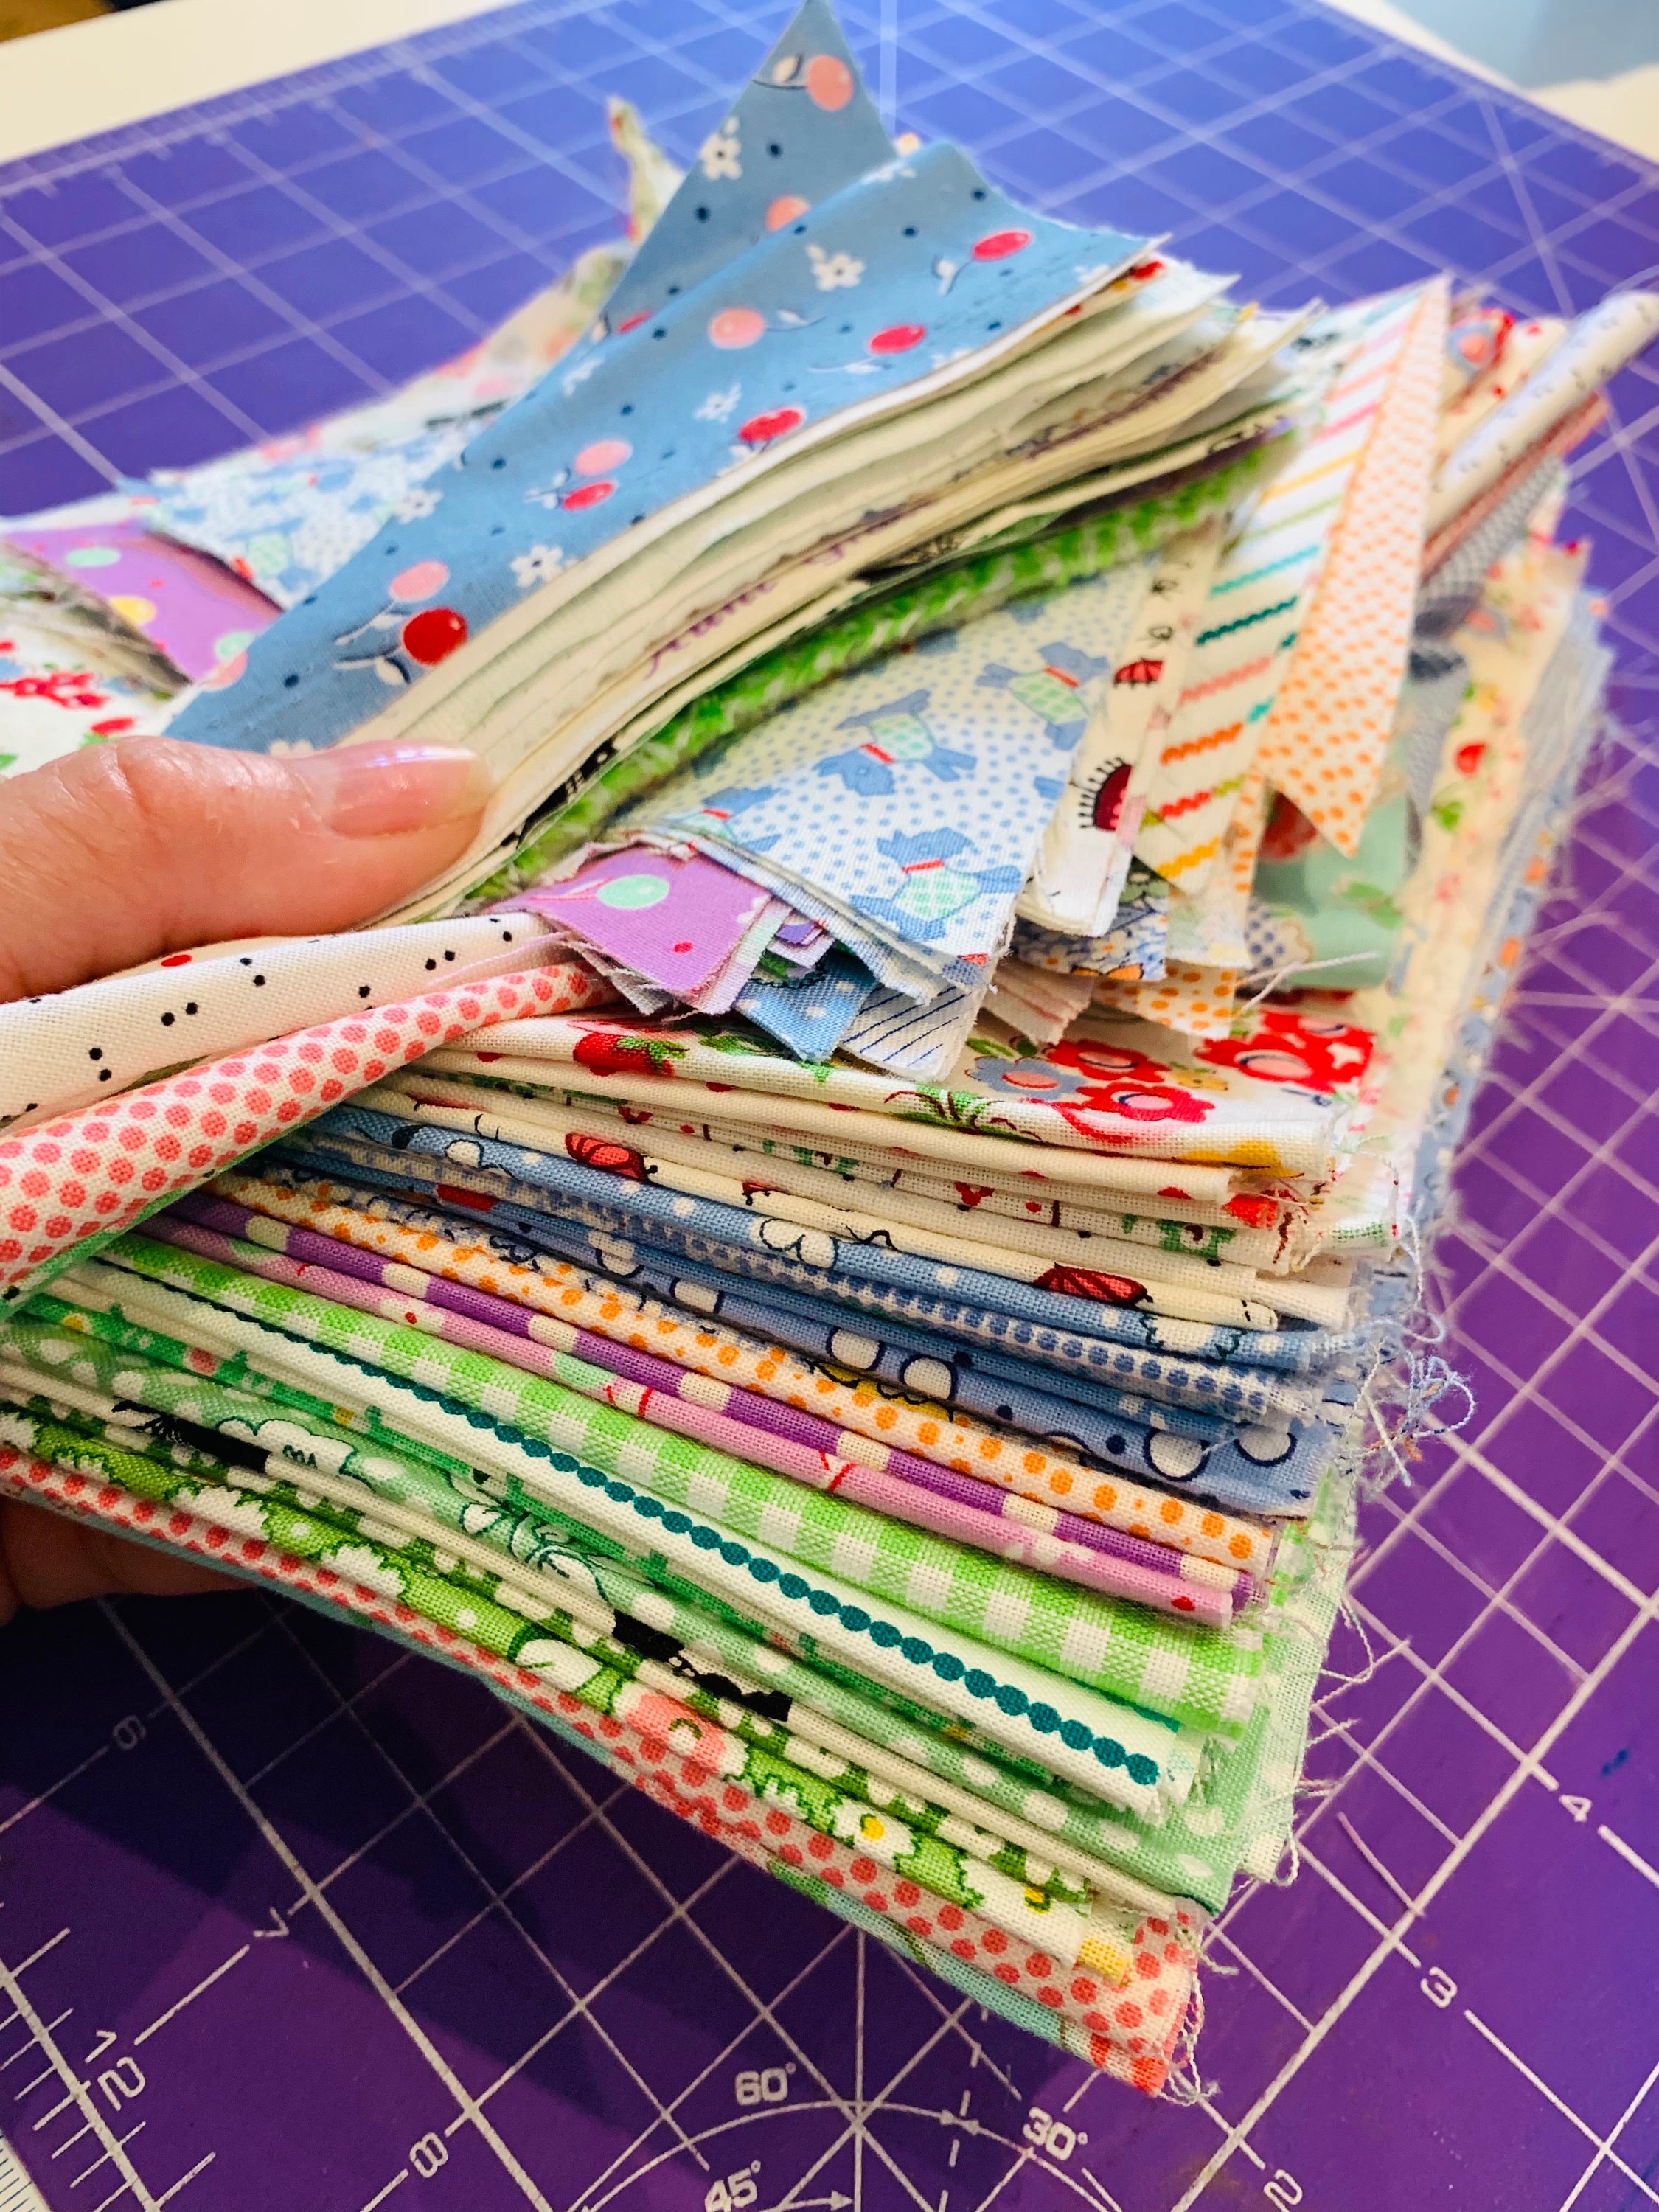 Sewing Scrappy Ebook - Make Cute Things With Scrap Fabric